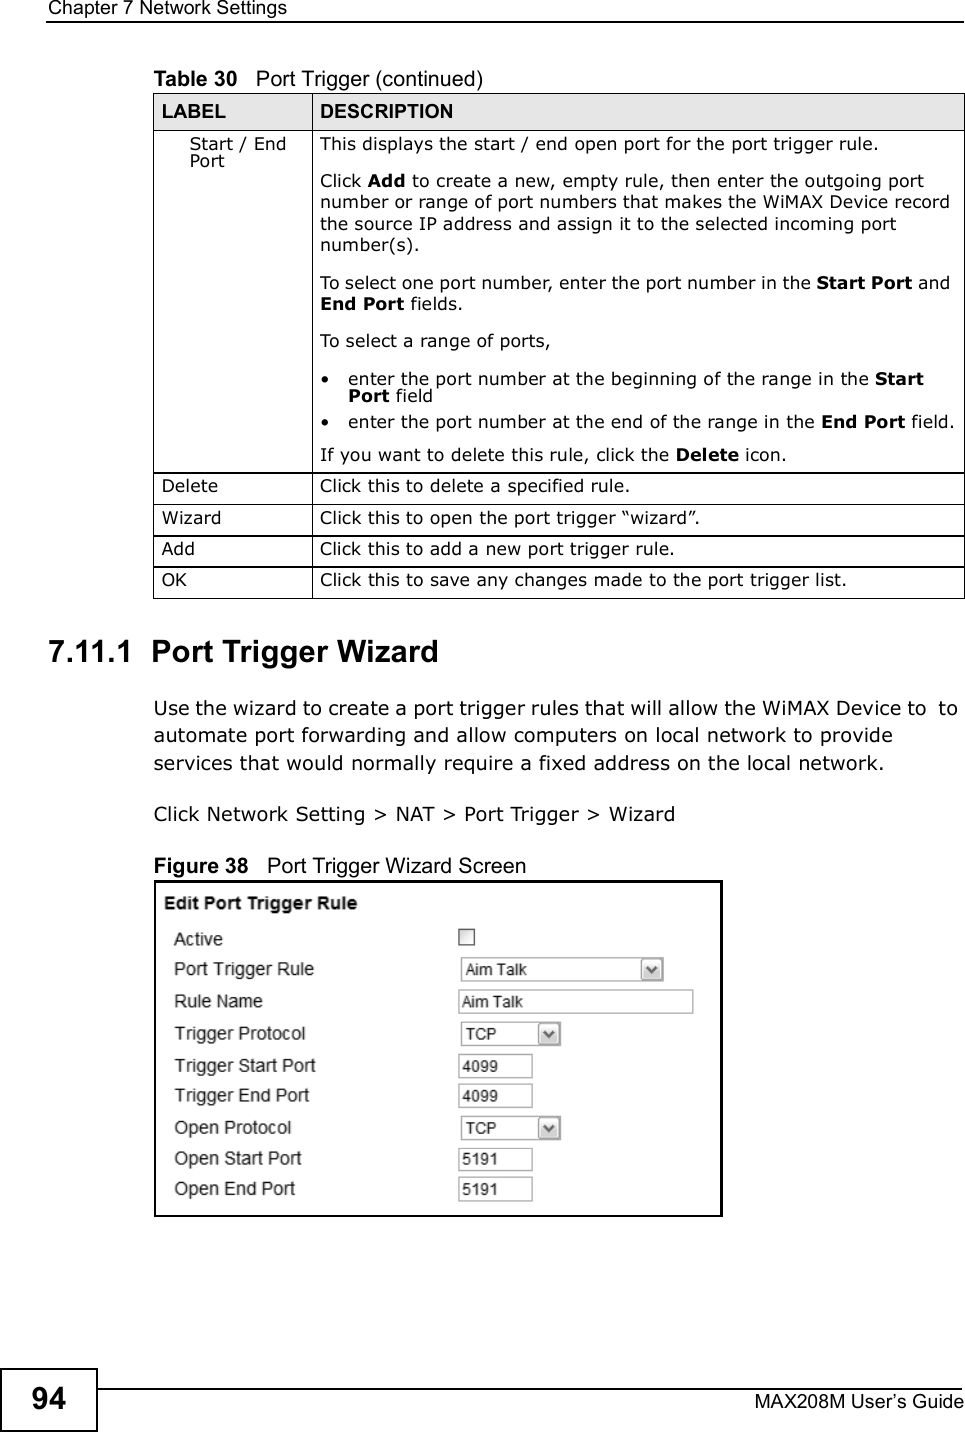 Chapter 7Network SettingsMAX208M User s Guide947.11.1  Port Trigger WizardUse the wizard to create a port trigger rules that will allow the WiMAX Device to  to automate port forwarding and allow computers on local network to provide services that would normally require a fixed address on the local network.Click Network Setting &gt; NAT &gt; Port Trigger &gt; WizardFigure 38   Port Trigger Wizard ScreenStart / End PortThis displays the start / end open port for the port trigger rule.Click Add to create a new, empty rule, then enter the outgoing port number or range of port numbers that makes the WiMAX Device record the source IP address and assign it to the selected incoming port number(s).To select one port number, enter the port number in the Start Port and End Port fields.To select a range of ports,!enter the port number at the beginning of the range in the Start Port field!enter the port number at the end of the range in the End Port field.If you want to delete this rule, click the Delete icon.DeleteClick this to delete a specified rule.WizardClick this to open the port trigger &quot;wizard#.AddClick this to add a new port trigger rule.OKClick this to save any changes made to the port trigger list.Table 30   Port Trigger (continued)LABEL DESCRIPTION